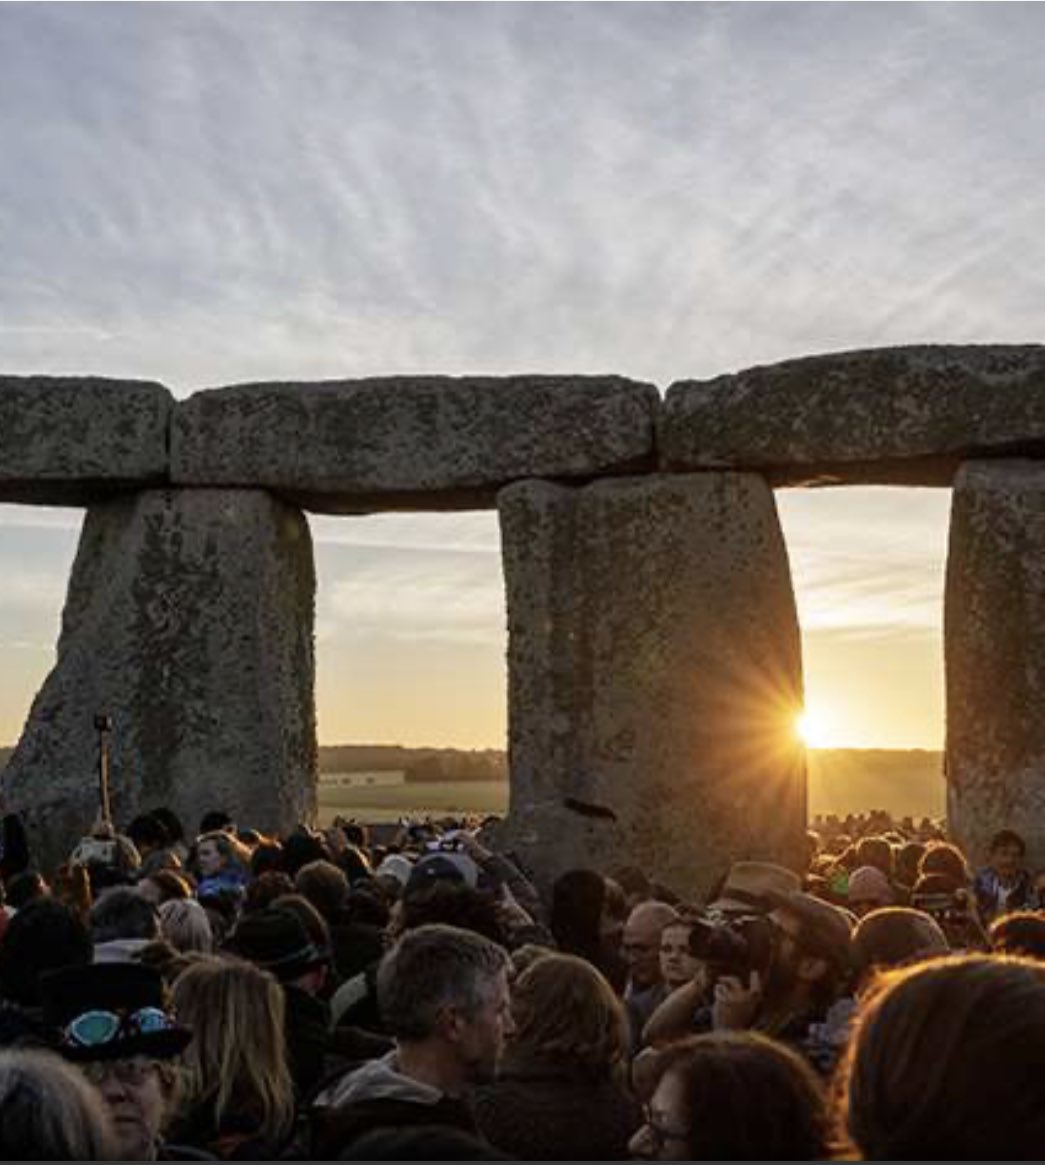 ☀️Today is Summer solstice 2023 ☀️ Thousands people celebrate summer solstice at Stonehenge🇬🇧☀️ #Solstice2023 #June21st